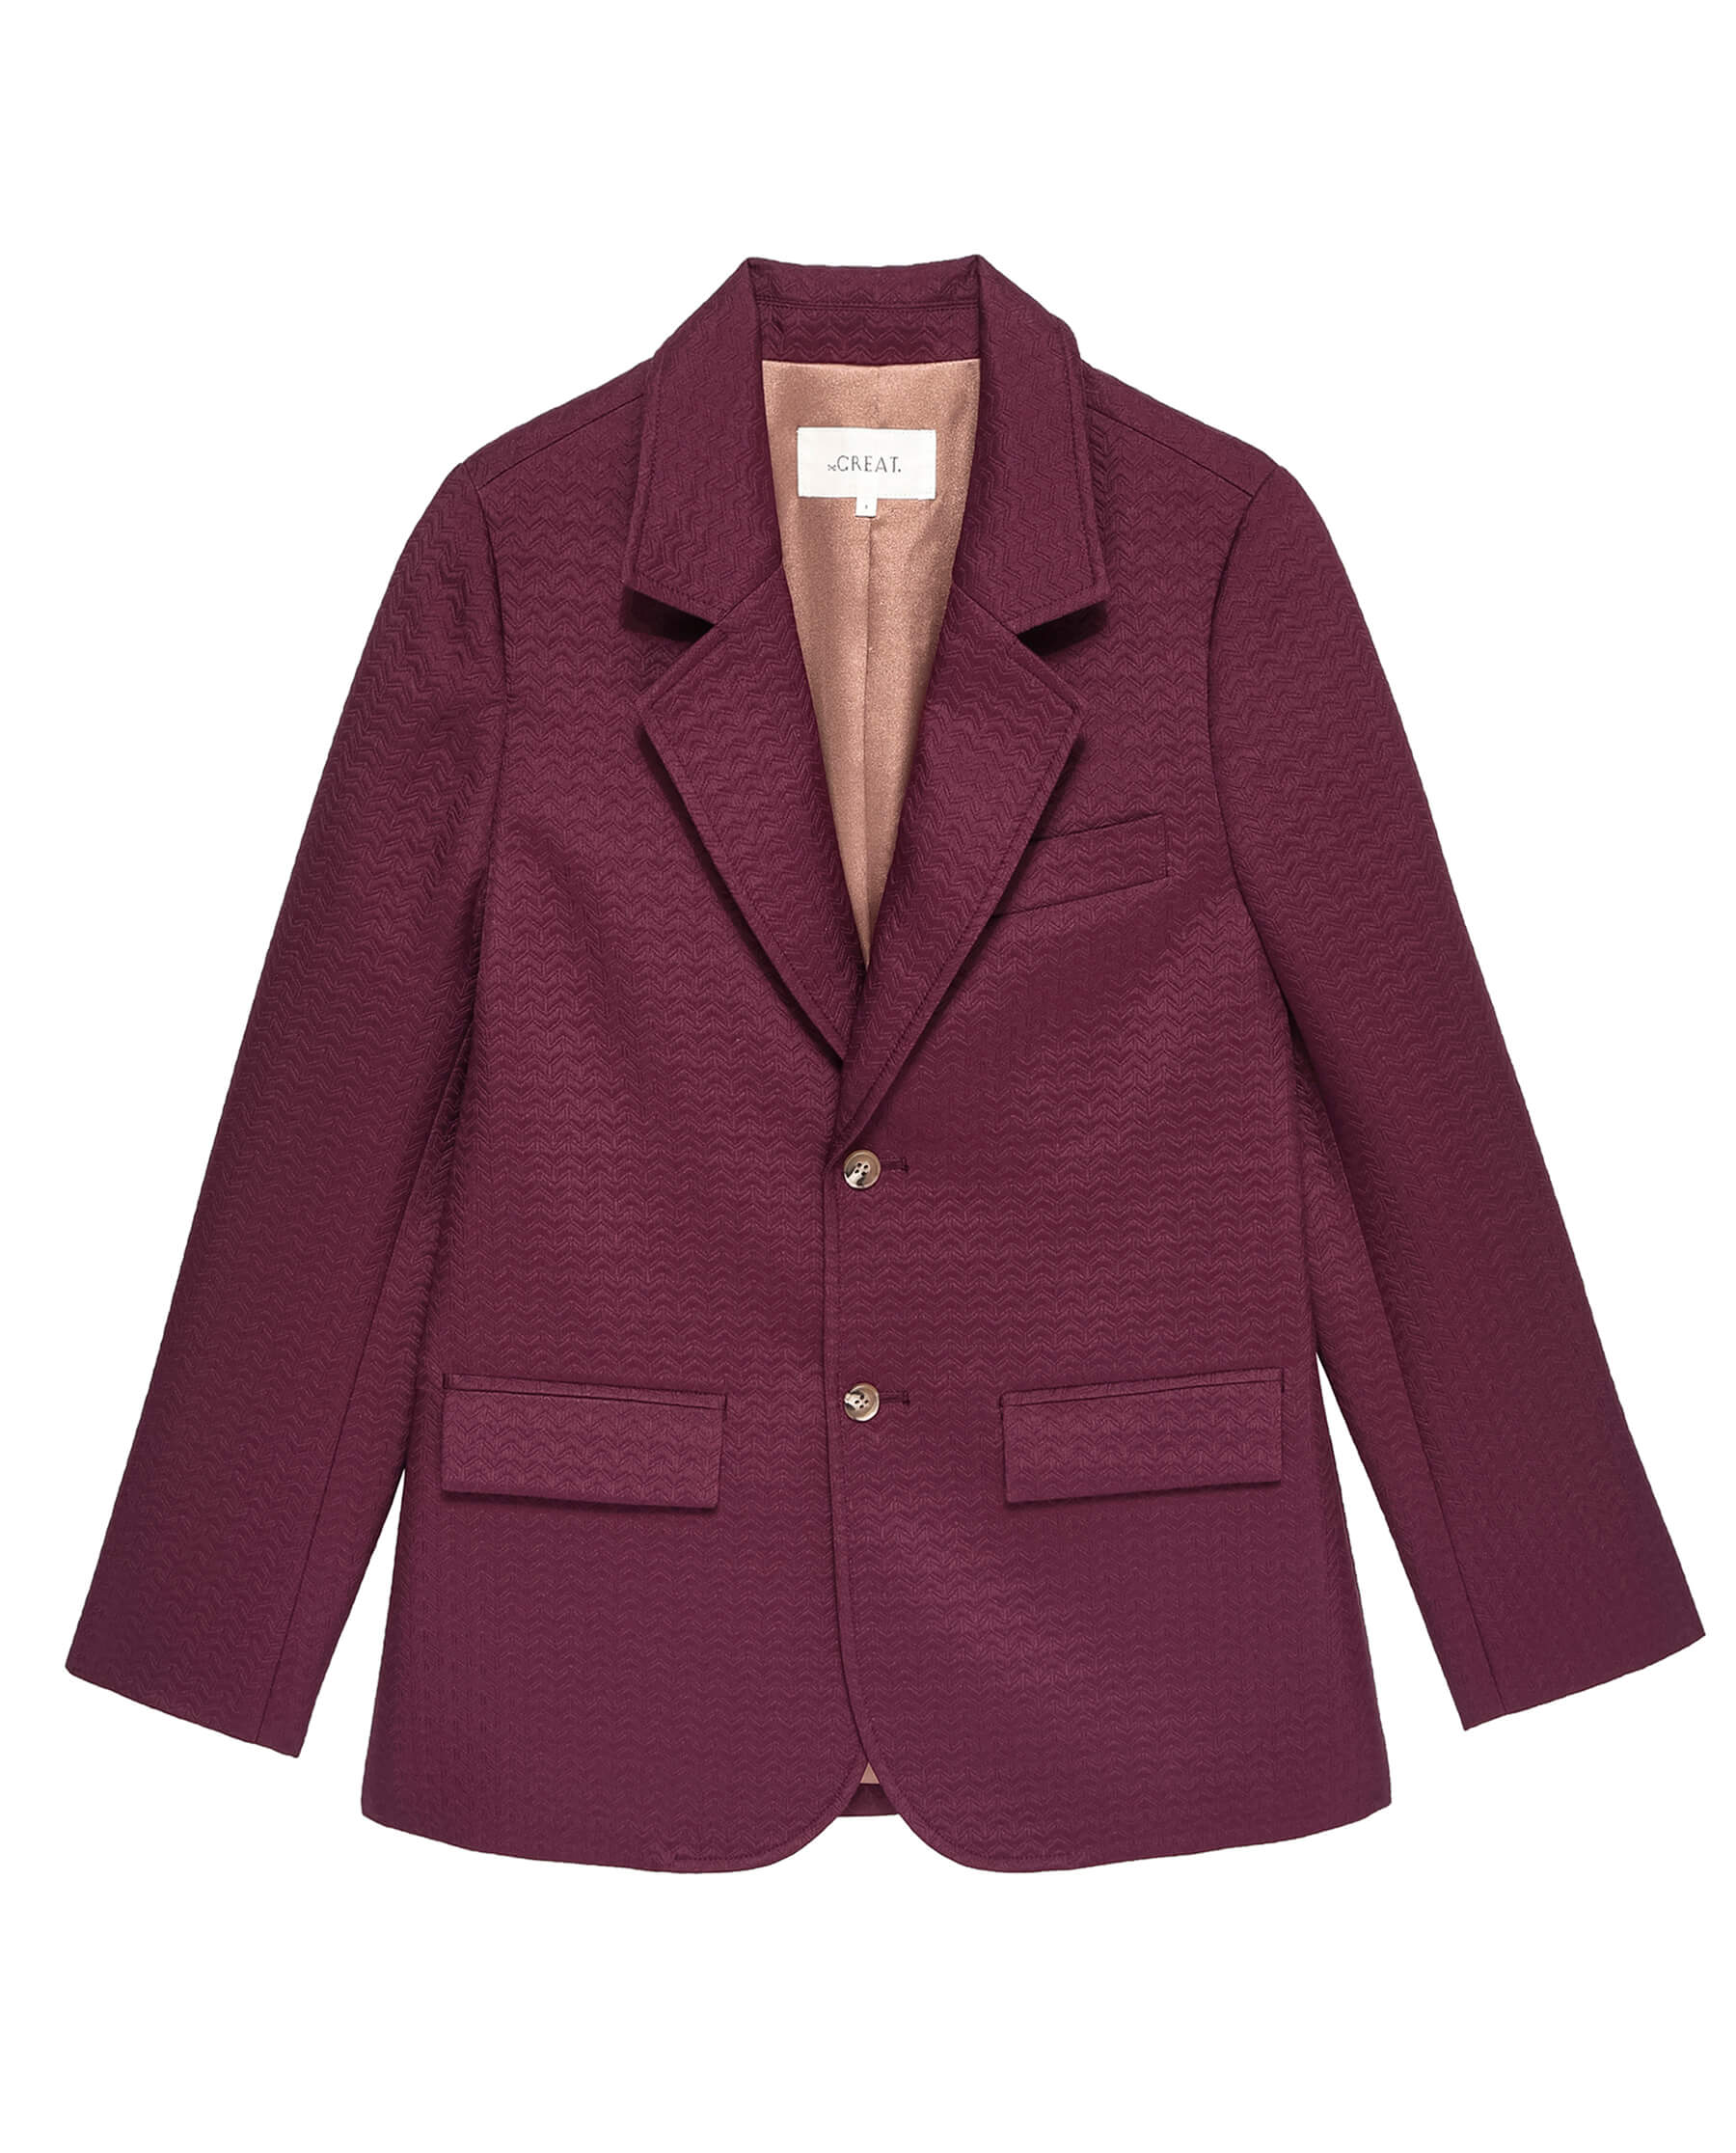 The Geo Jacquard Smoking Jacket. -- Mulled Wine JACKET THE GREAT. HOL 23 D1 SALE